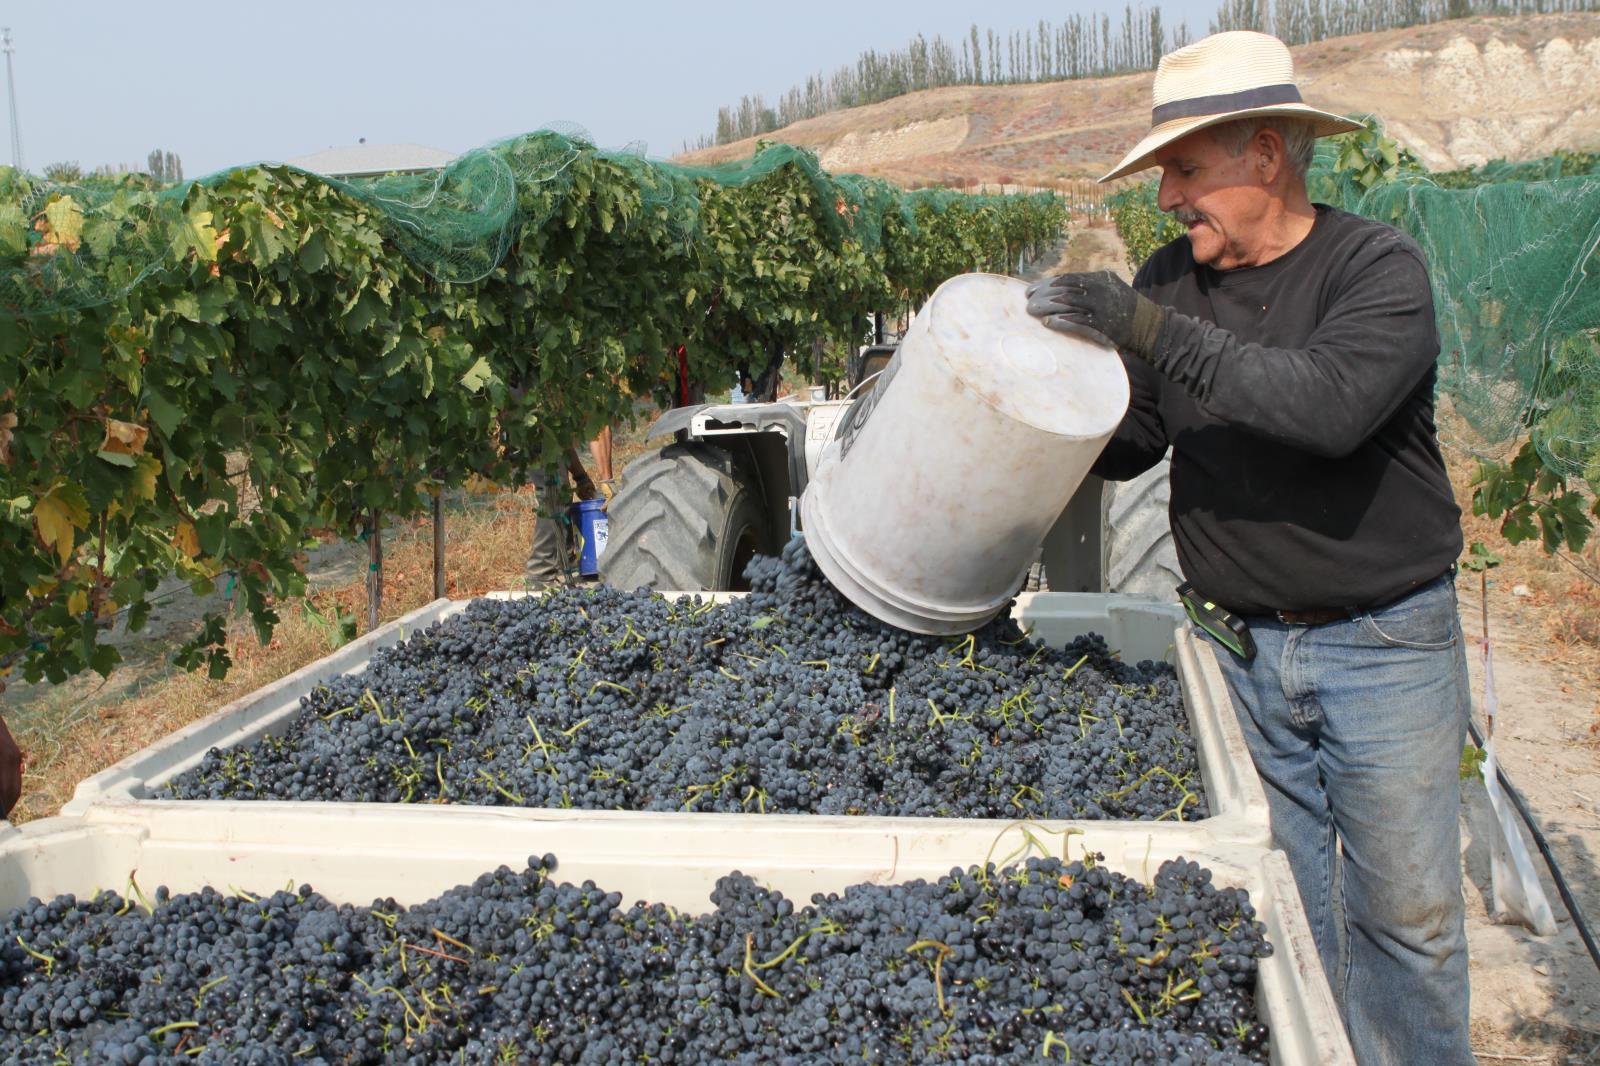 Wine grapes are harvested in a vineyard in Caldwell Oct. 12. Members of the state’s wine industry say yields are average this year quality looks great. 